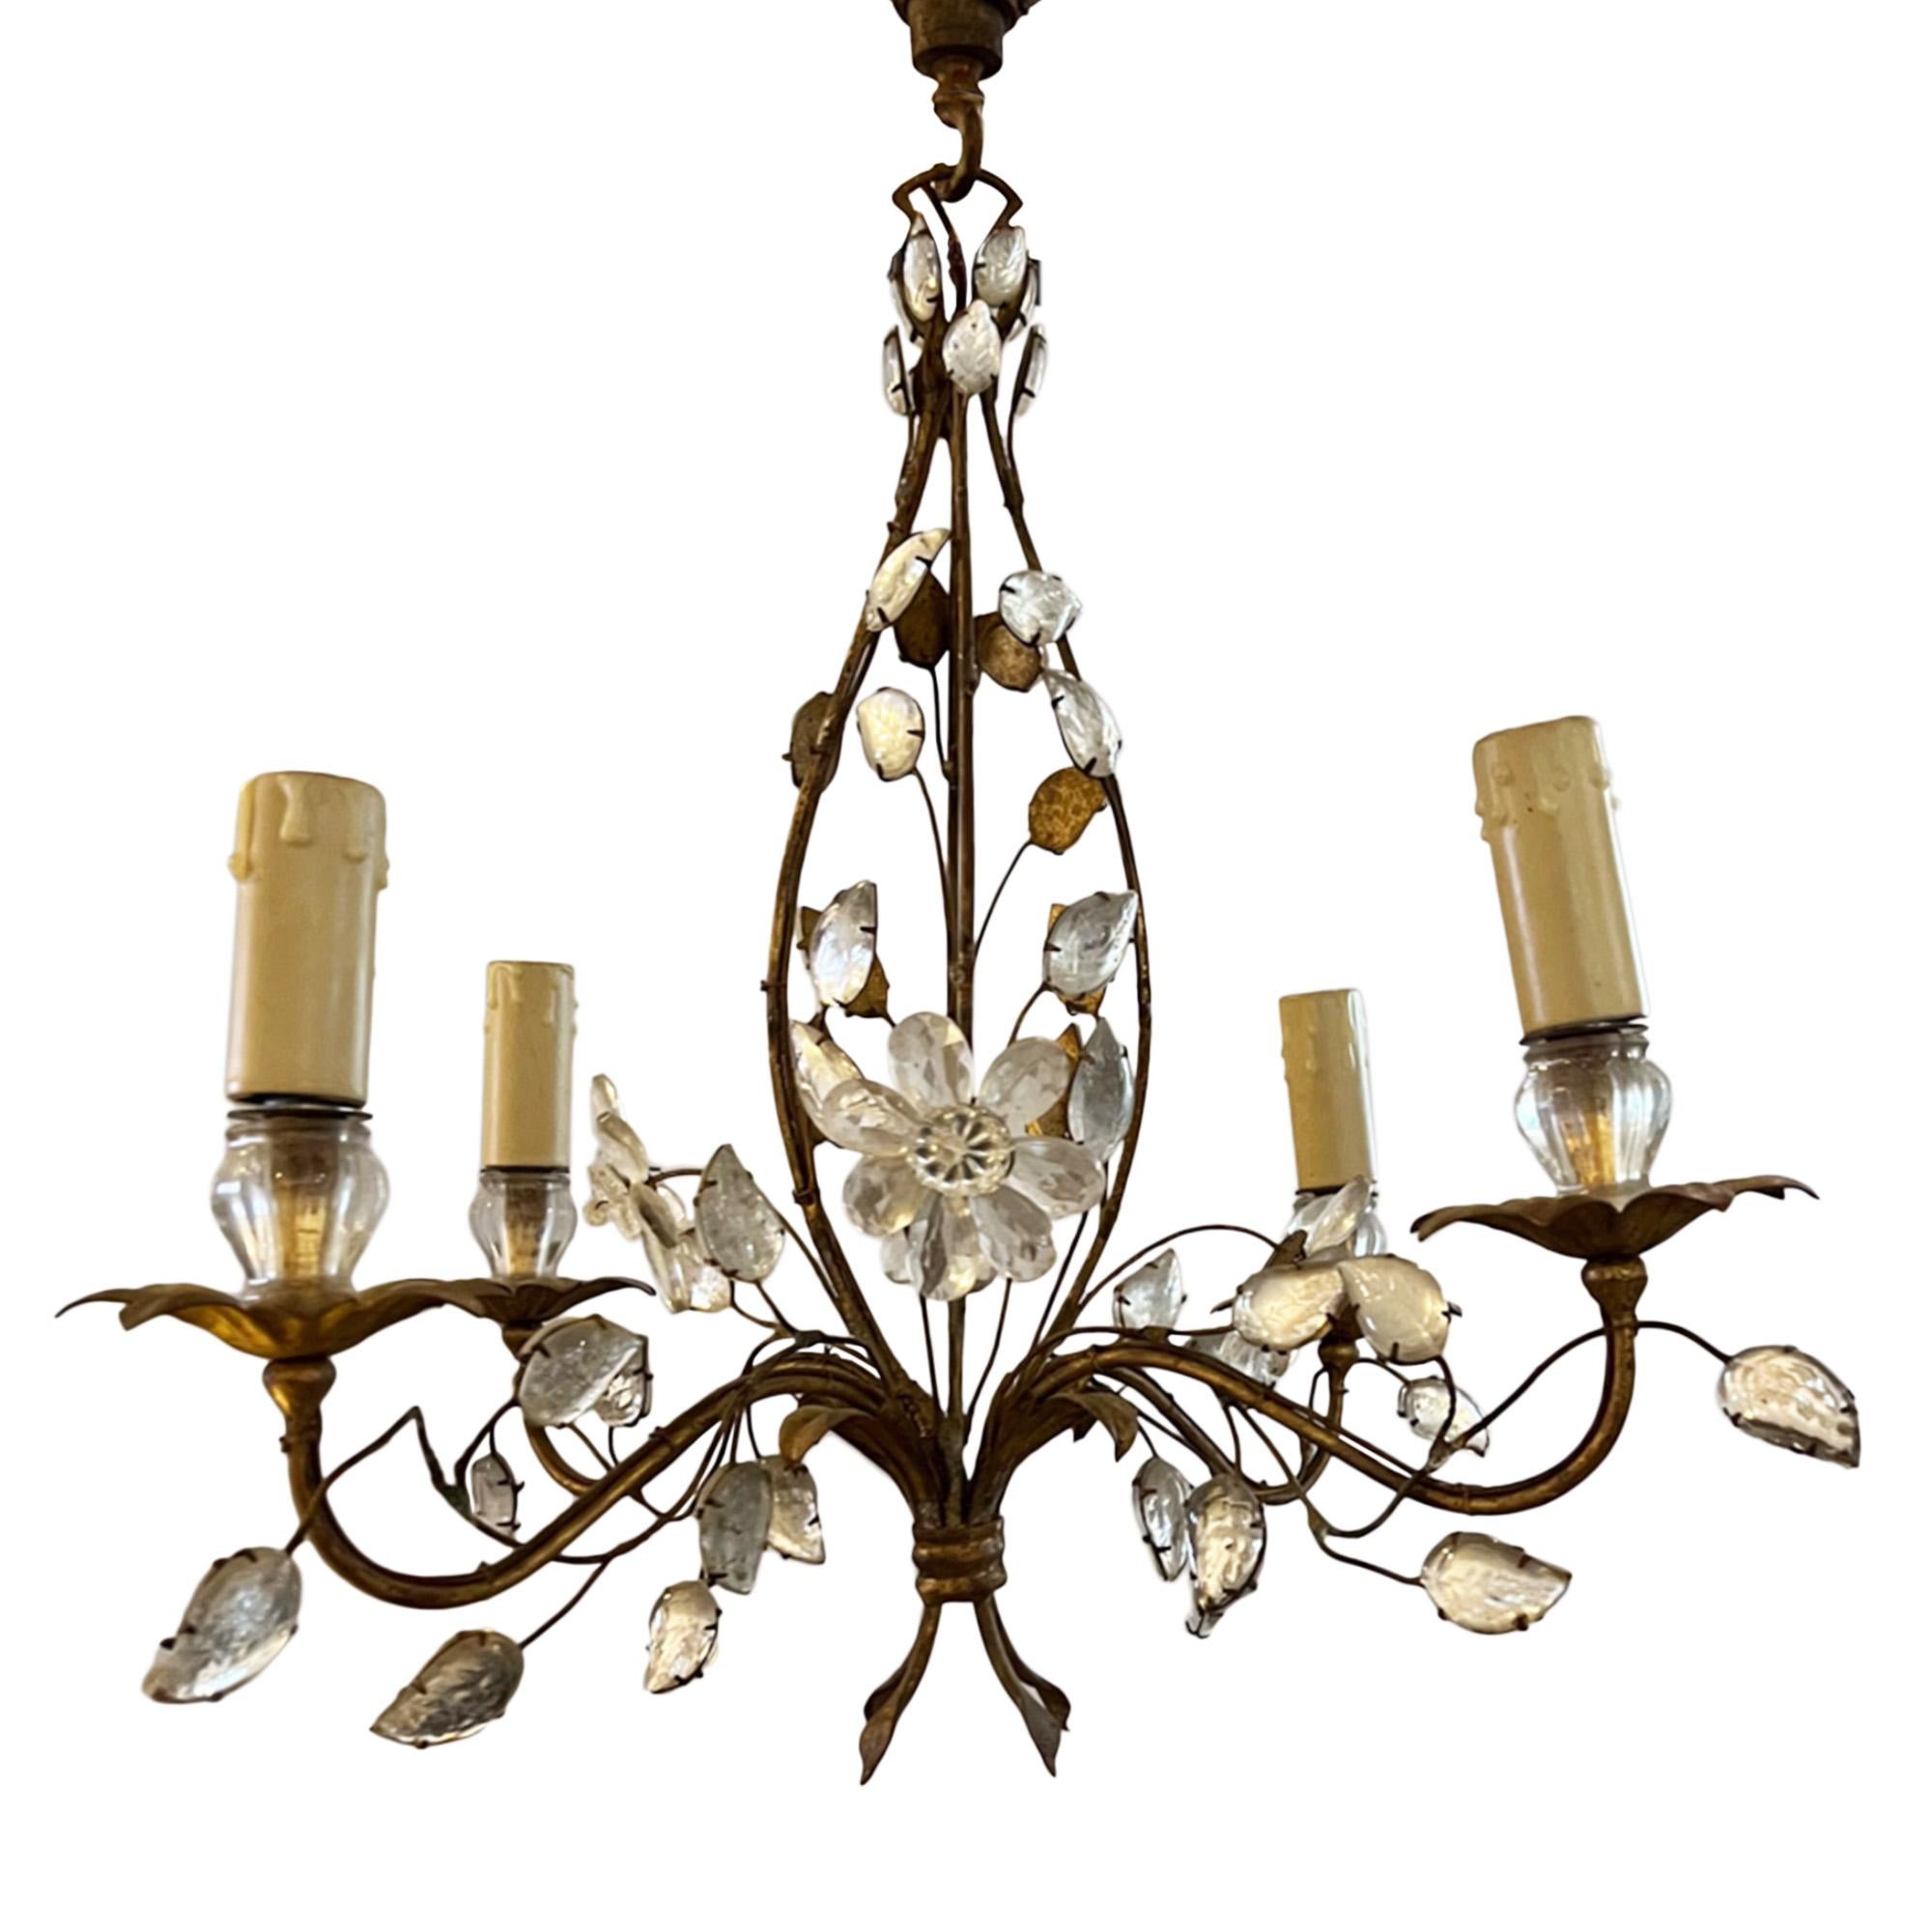 Wonderfully elegant mid 20th century gilt metal and crystal chandelier by Maison Baguès. Made in Paris in the 1960s.

This smaller light has 4 arms, with the light fitting in the shape of an open bud. Decorated with crystal leaves and flowers - this